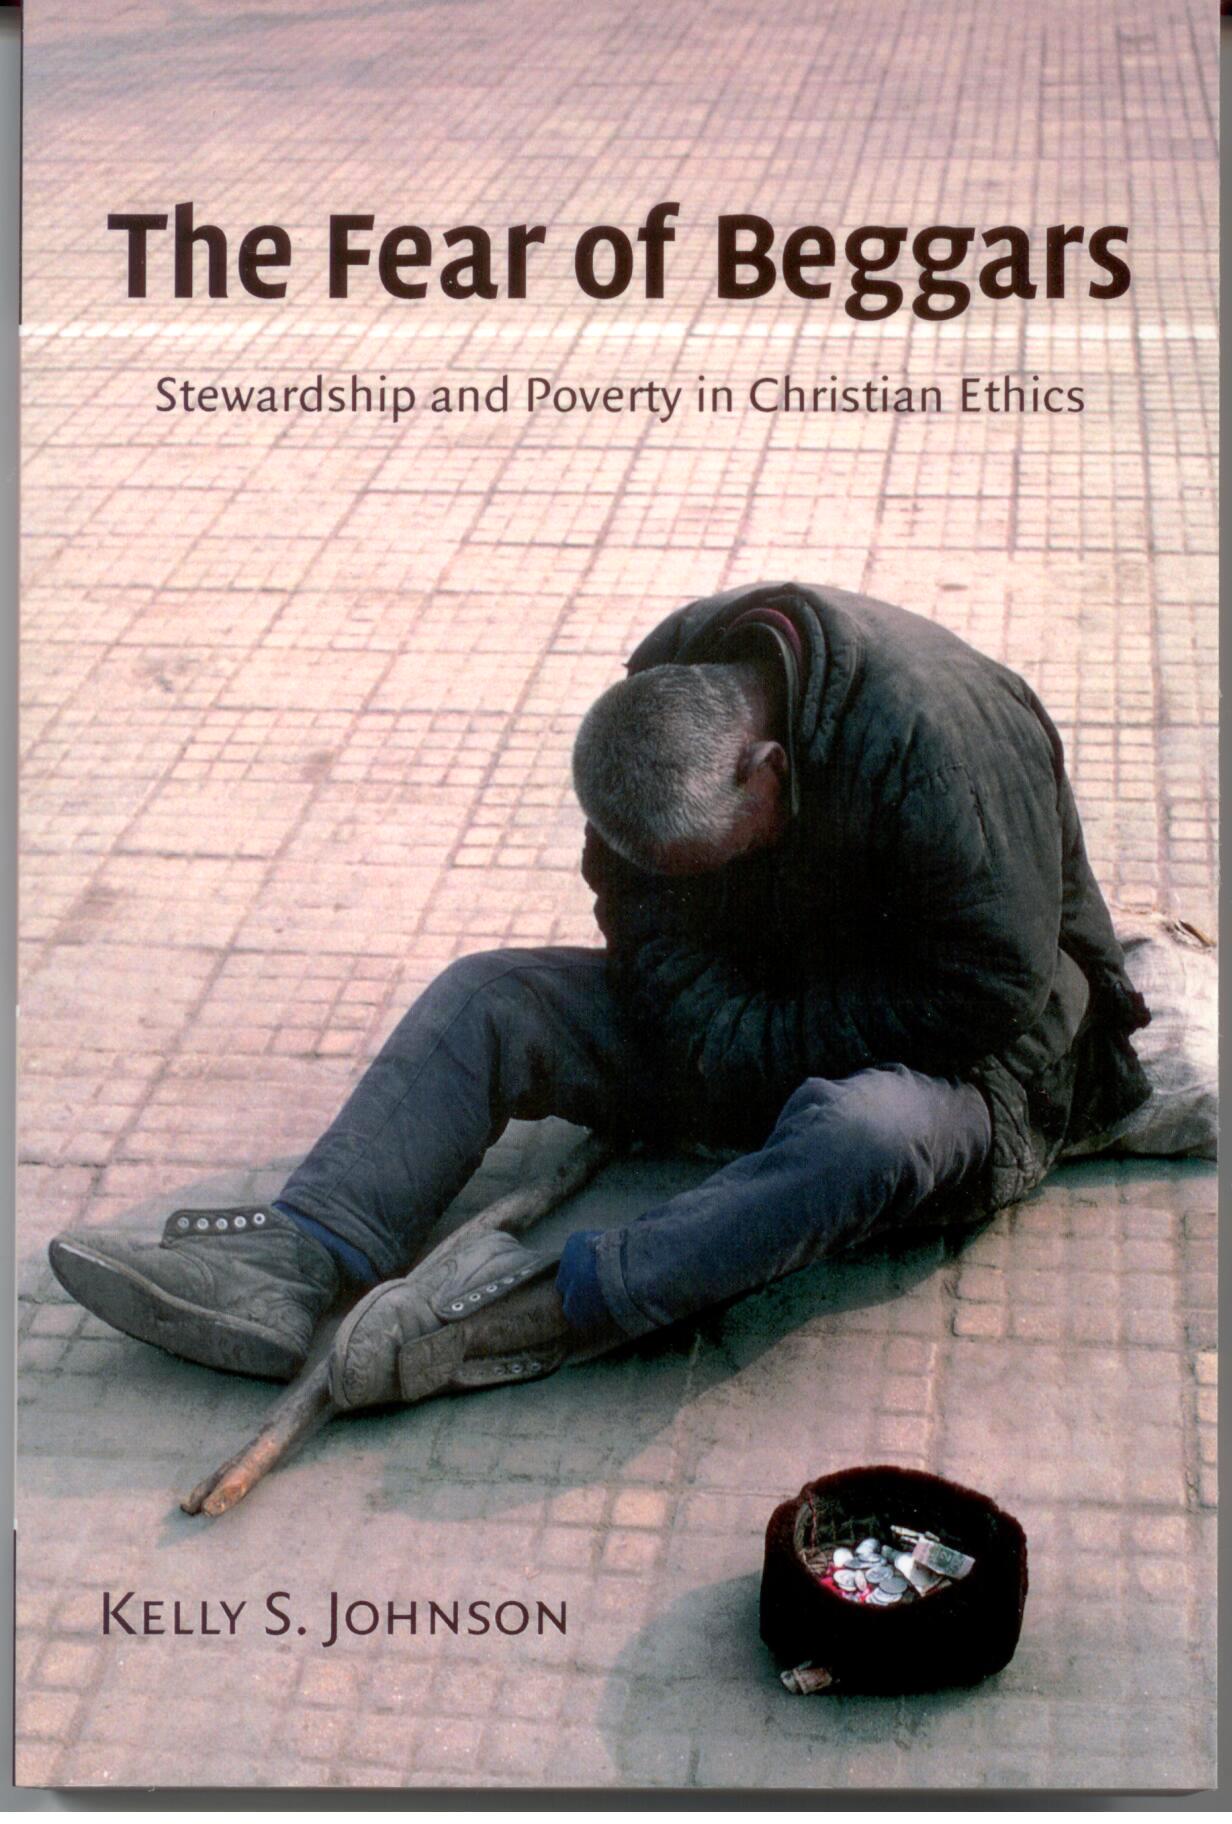 The Fear of Beggars: Stewardship and Poverty in Christian Ethics by Kelly S. Johnson